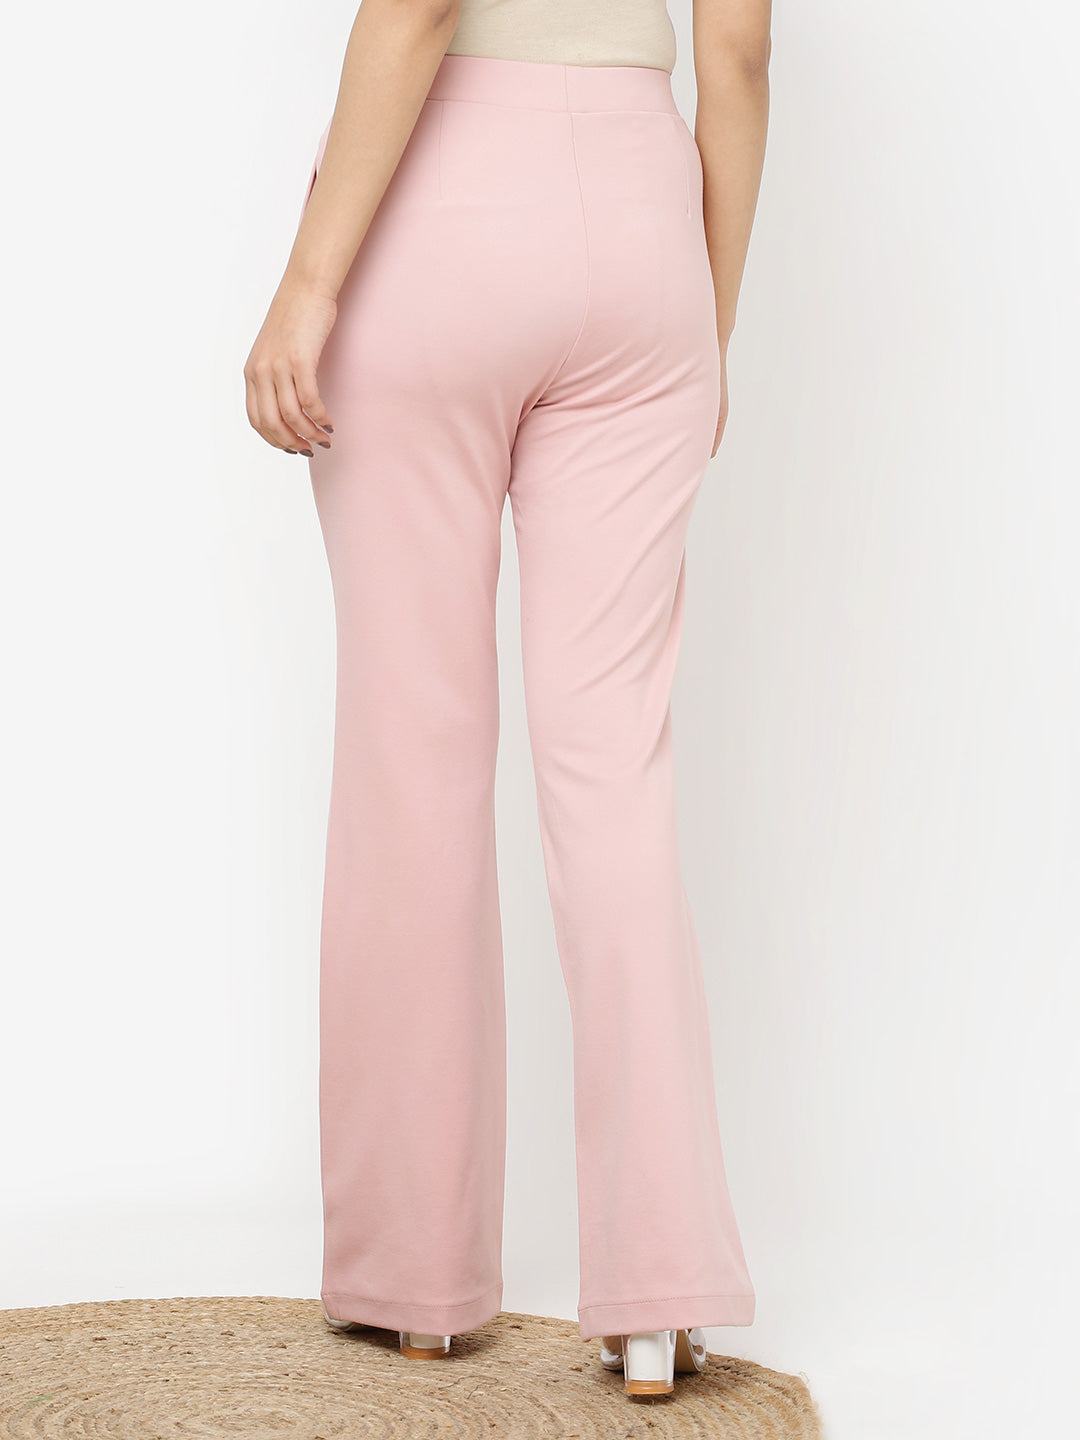 Blush Pink Imported Crepe Trousers Design by Not So Serious by Pallavi  Mohan at Pernia's Pop Up Shop 2024